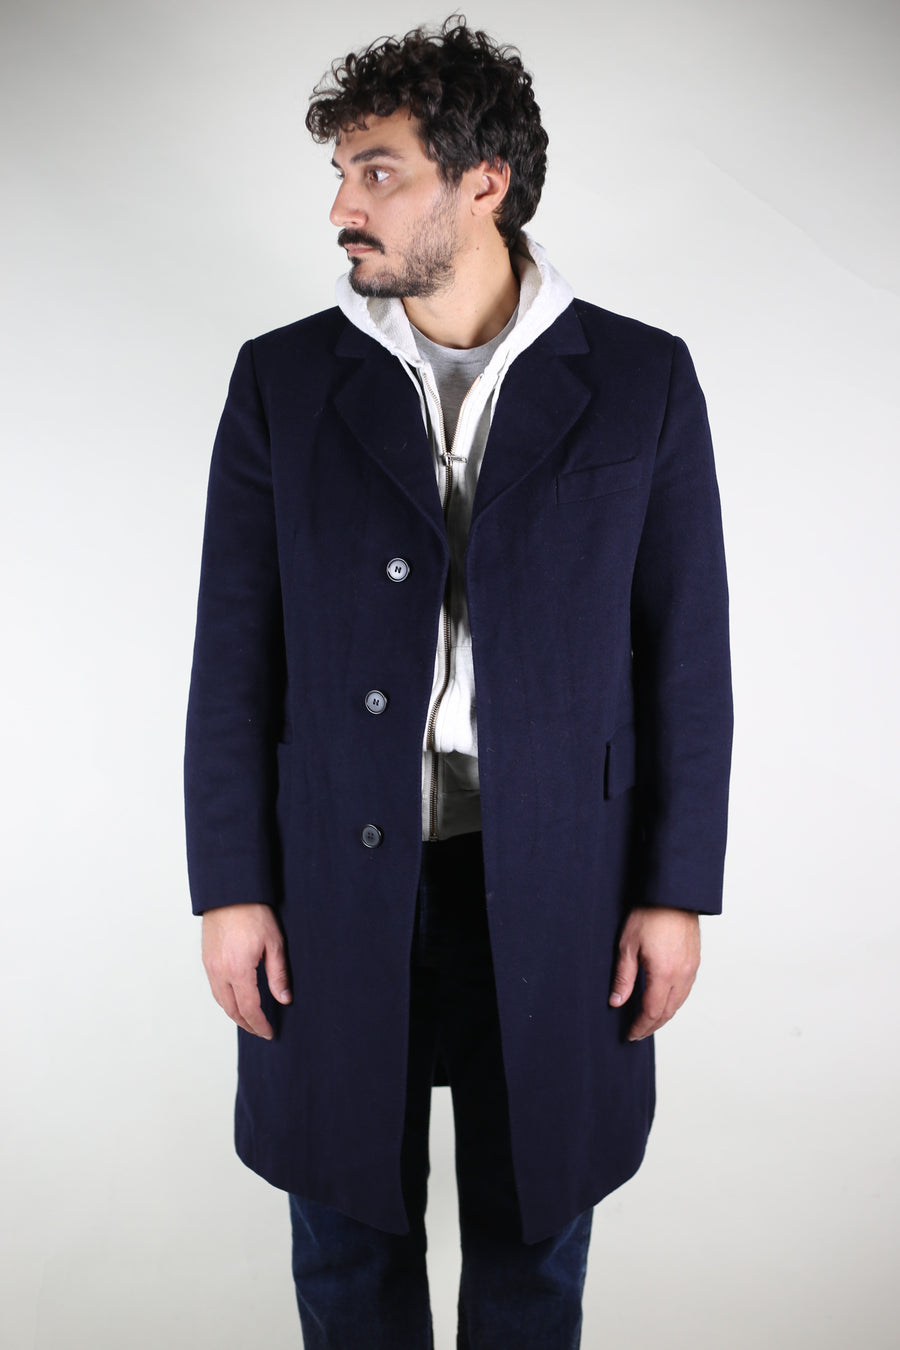 CAPPOTTO MONOPETTO  Vintage MADE IN ENGLAND  - L -